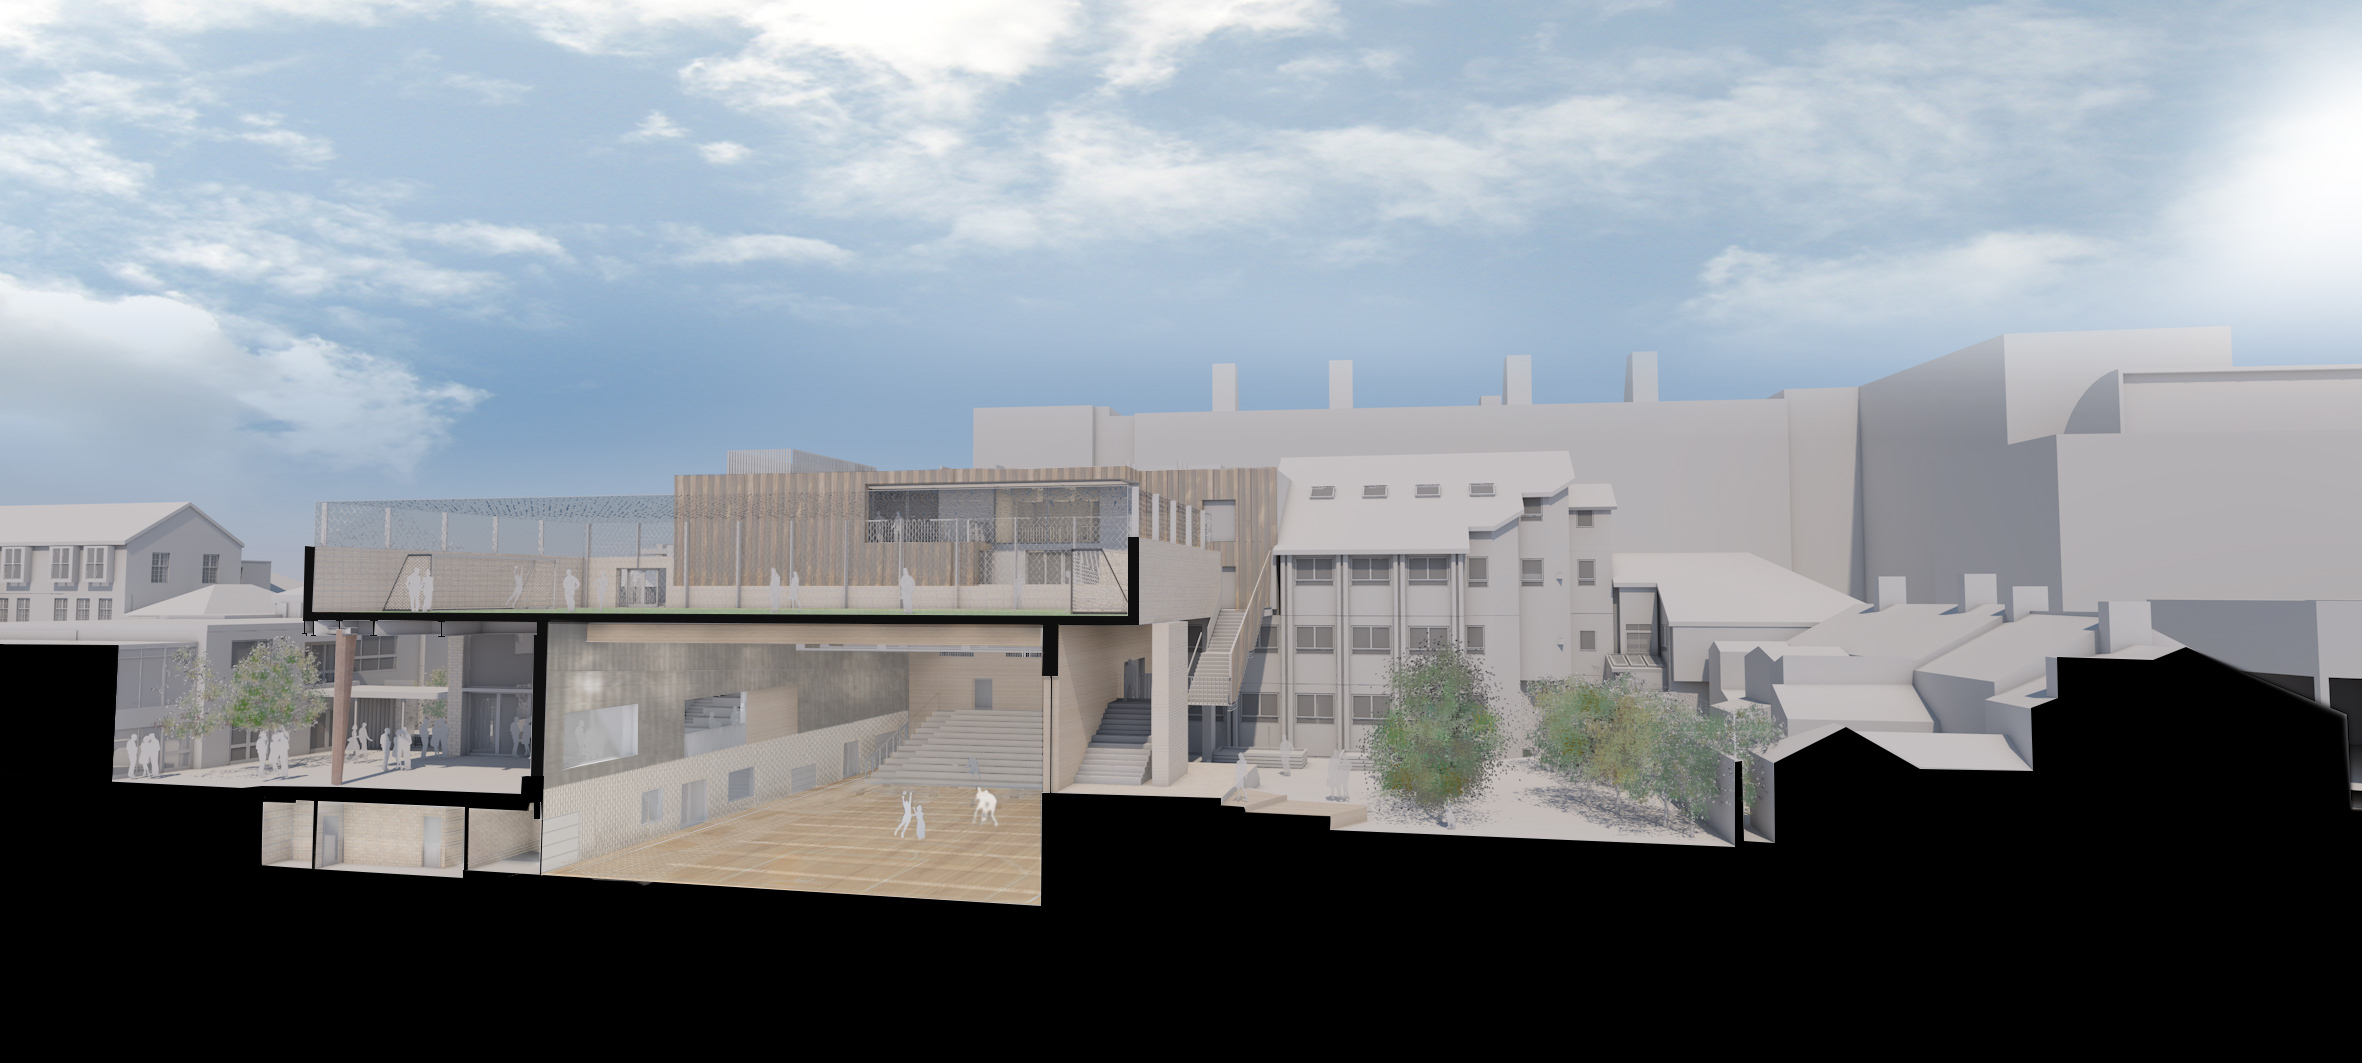 Cross section of sports hall from behind the street, | CDC Studio Cambridge architects